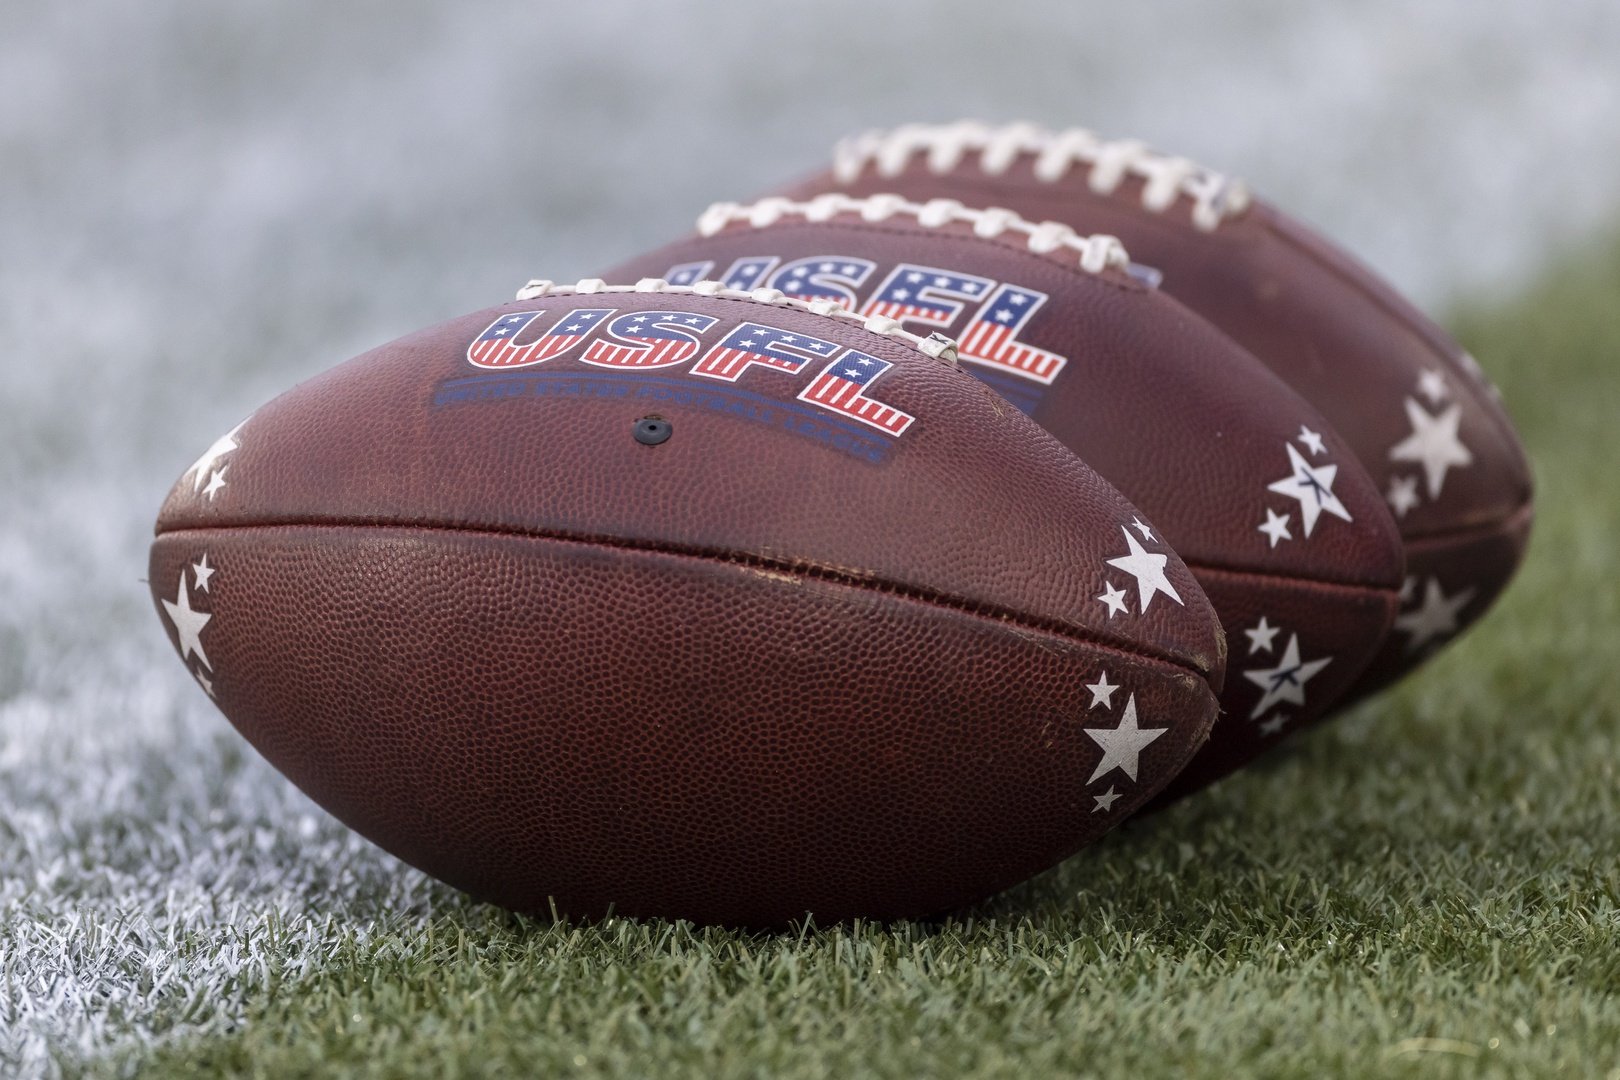 USFL balls sit at the ready during the first half at Protective Stadium.